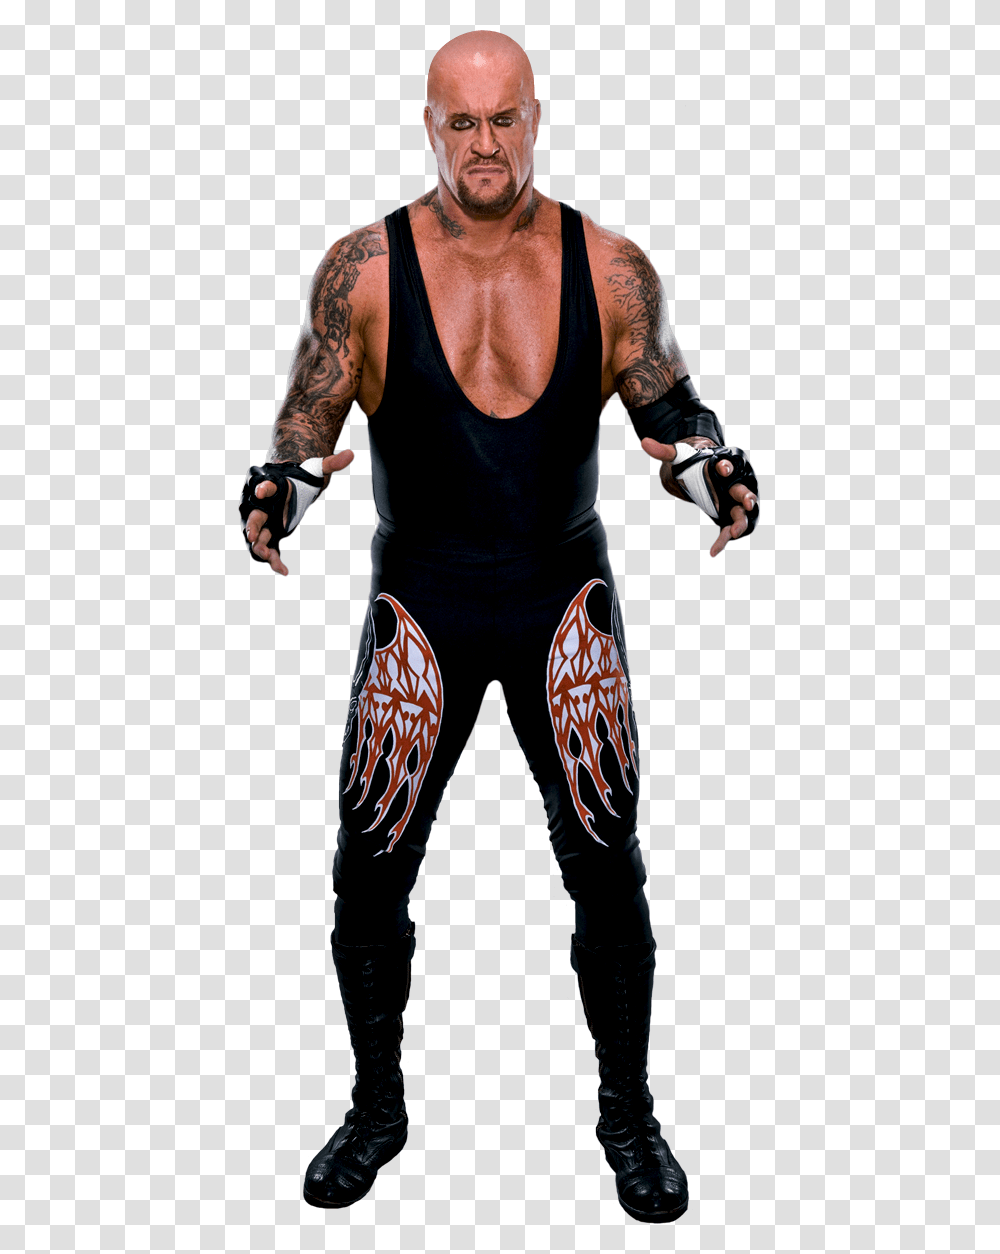 The Pro Wrestling Thread, Skin, Person, Tattoo Transparent Png